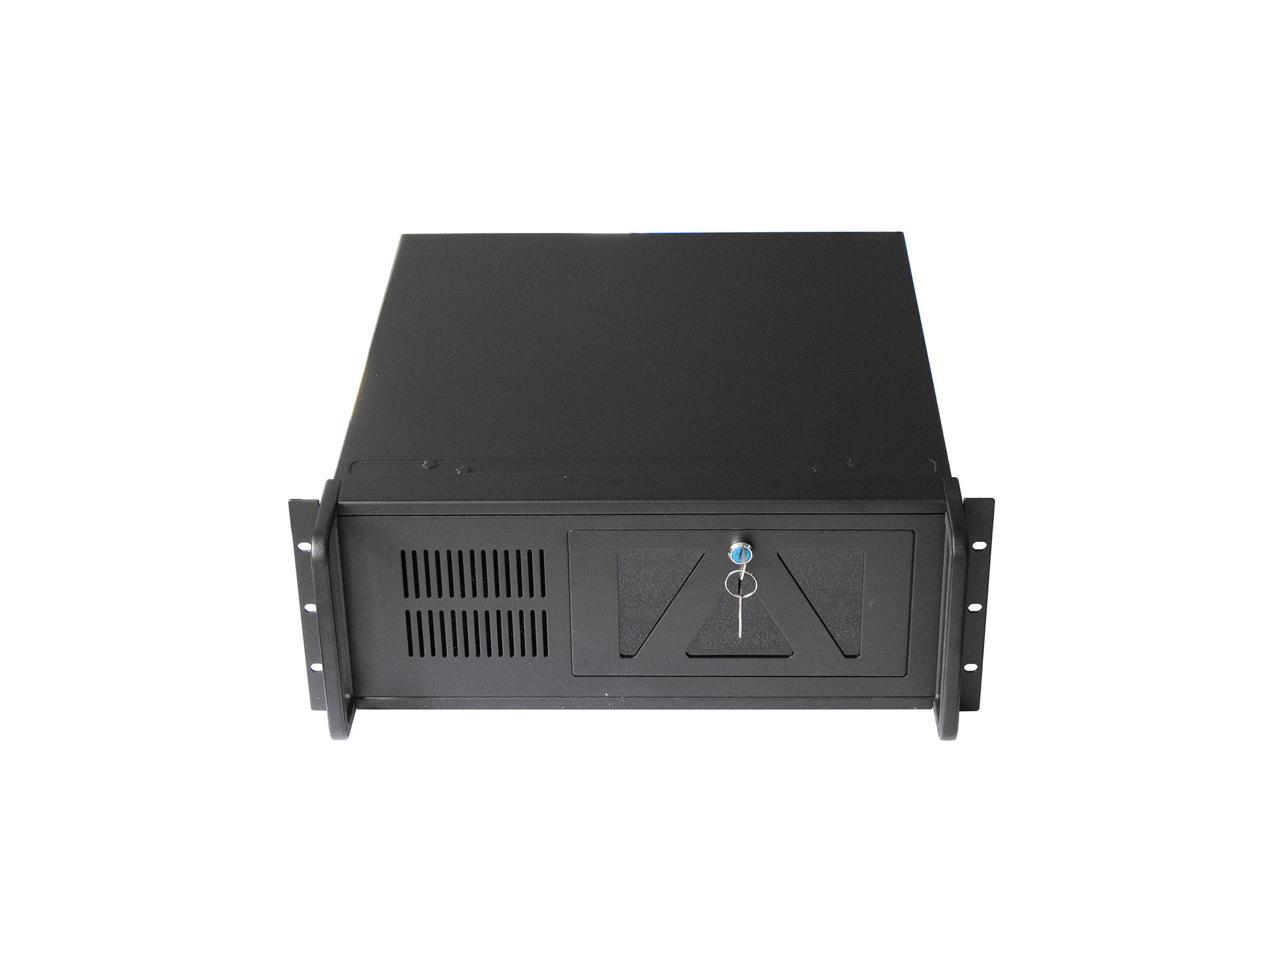 4U Industrial Control Chassis / Standard Rack-Mounted Industrial Chassis / 2 5.25-Inch Optical Drive Bays / 7 Pci / Pcie Full-Height Expansion Slots